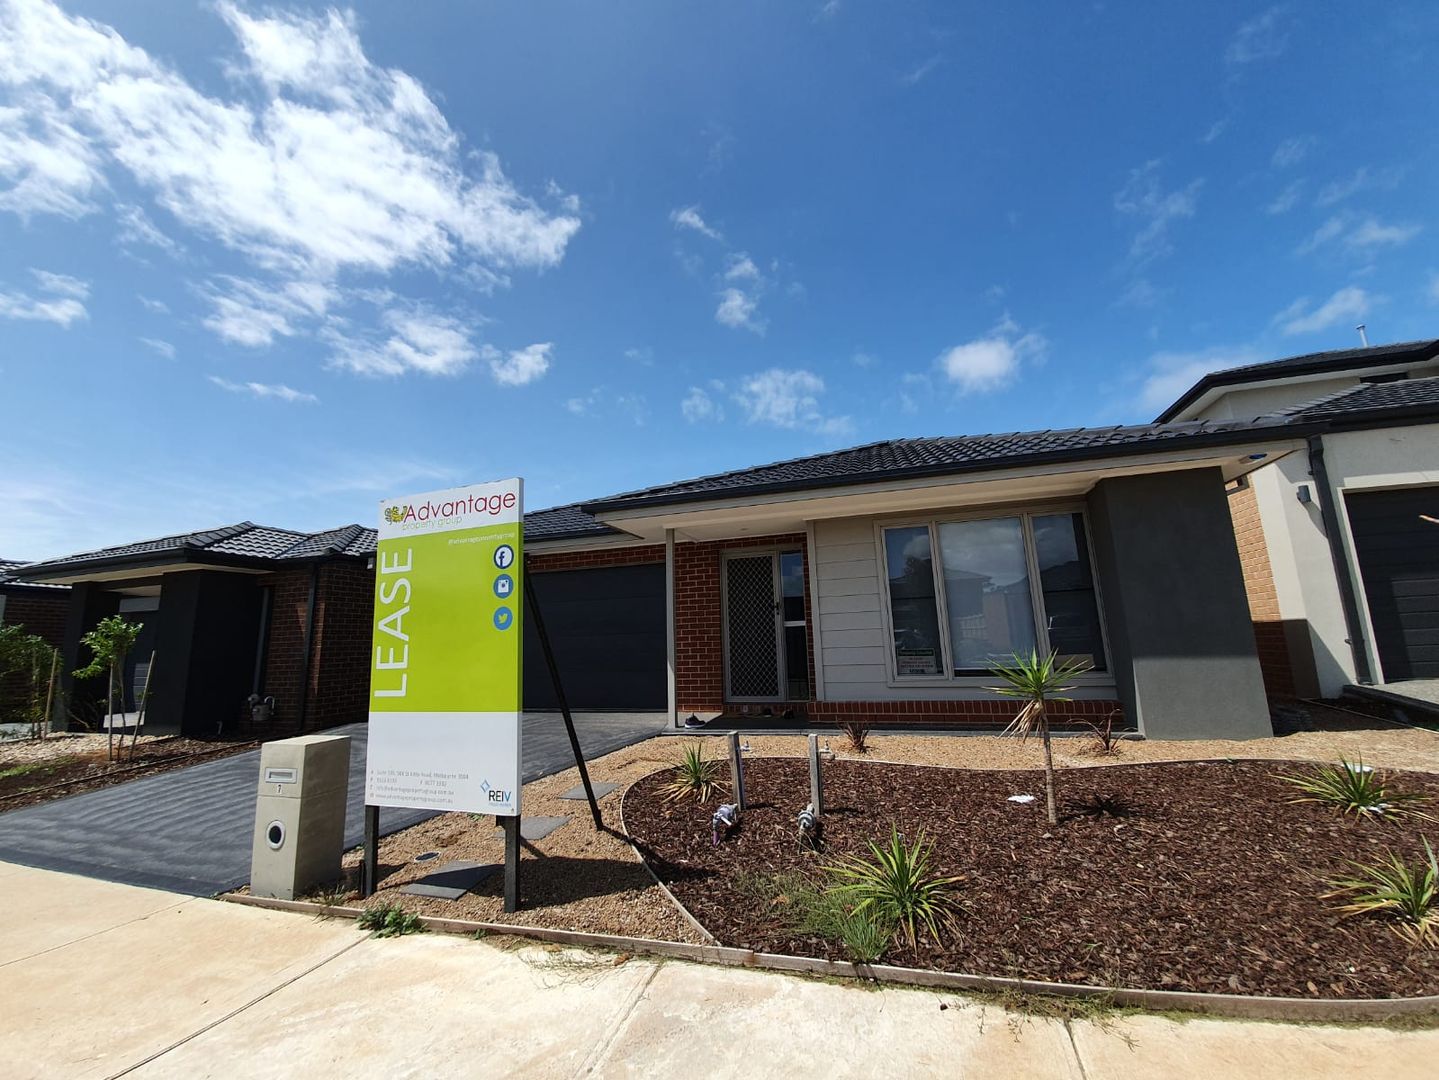 lease transfer house in point cook